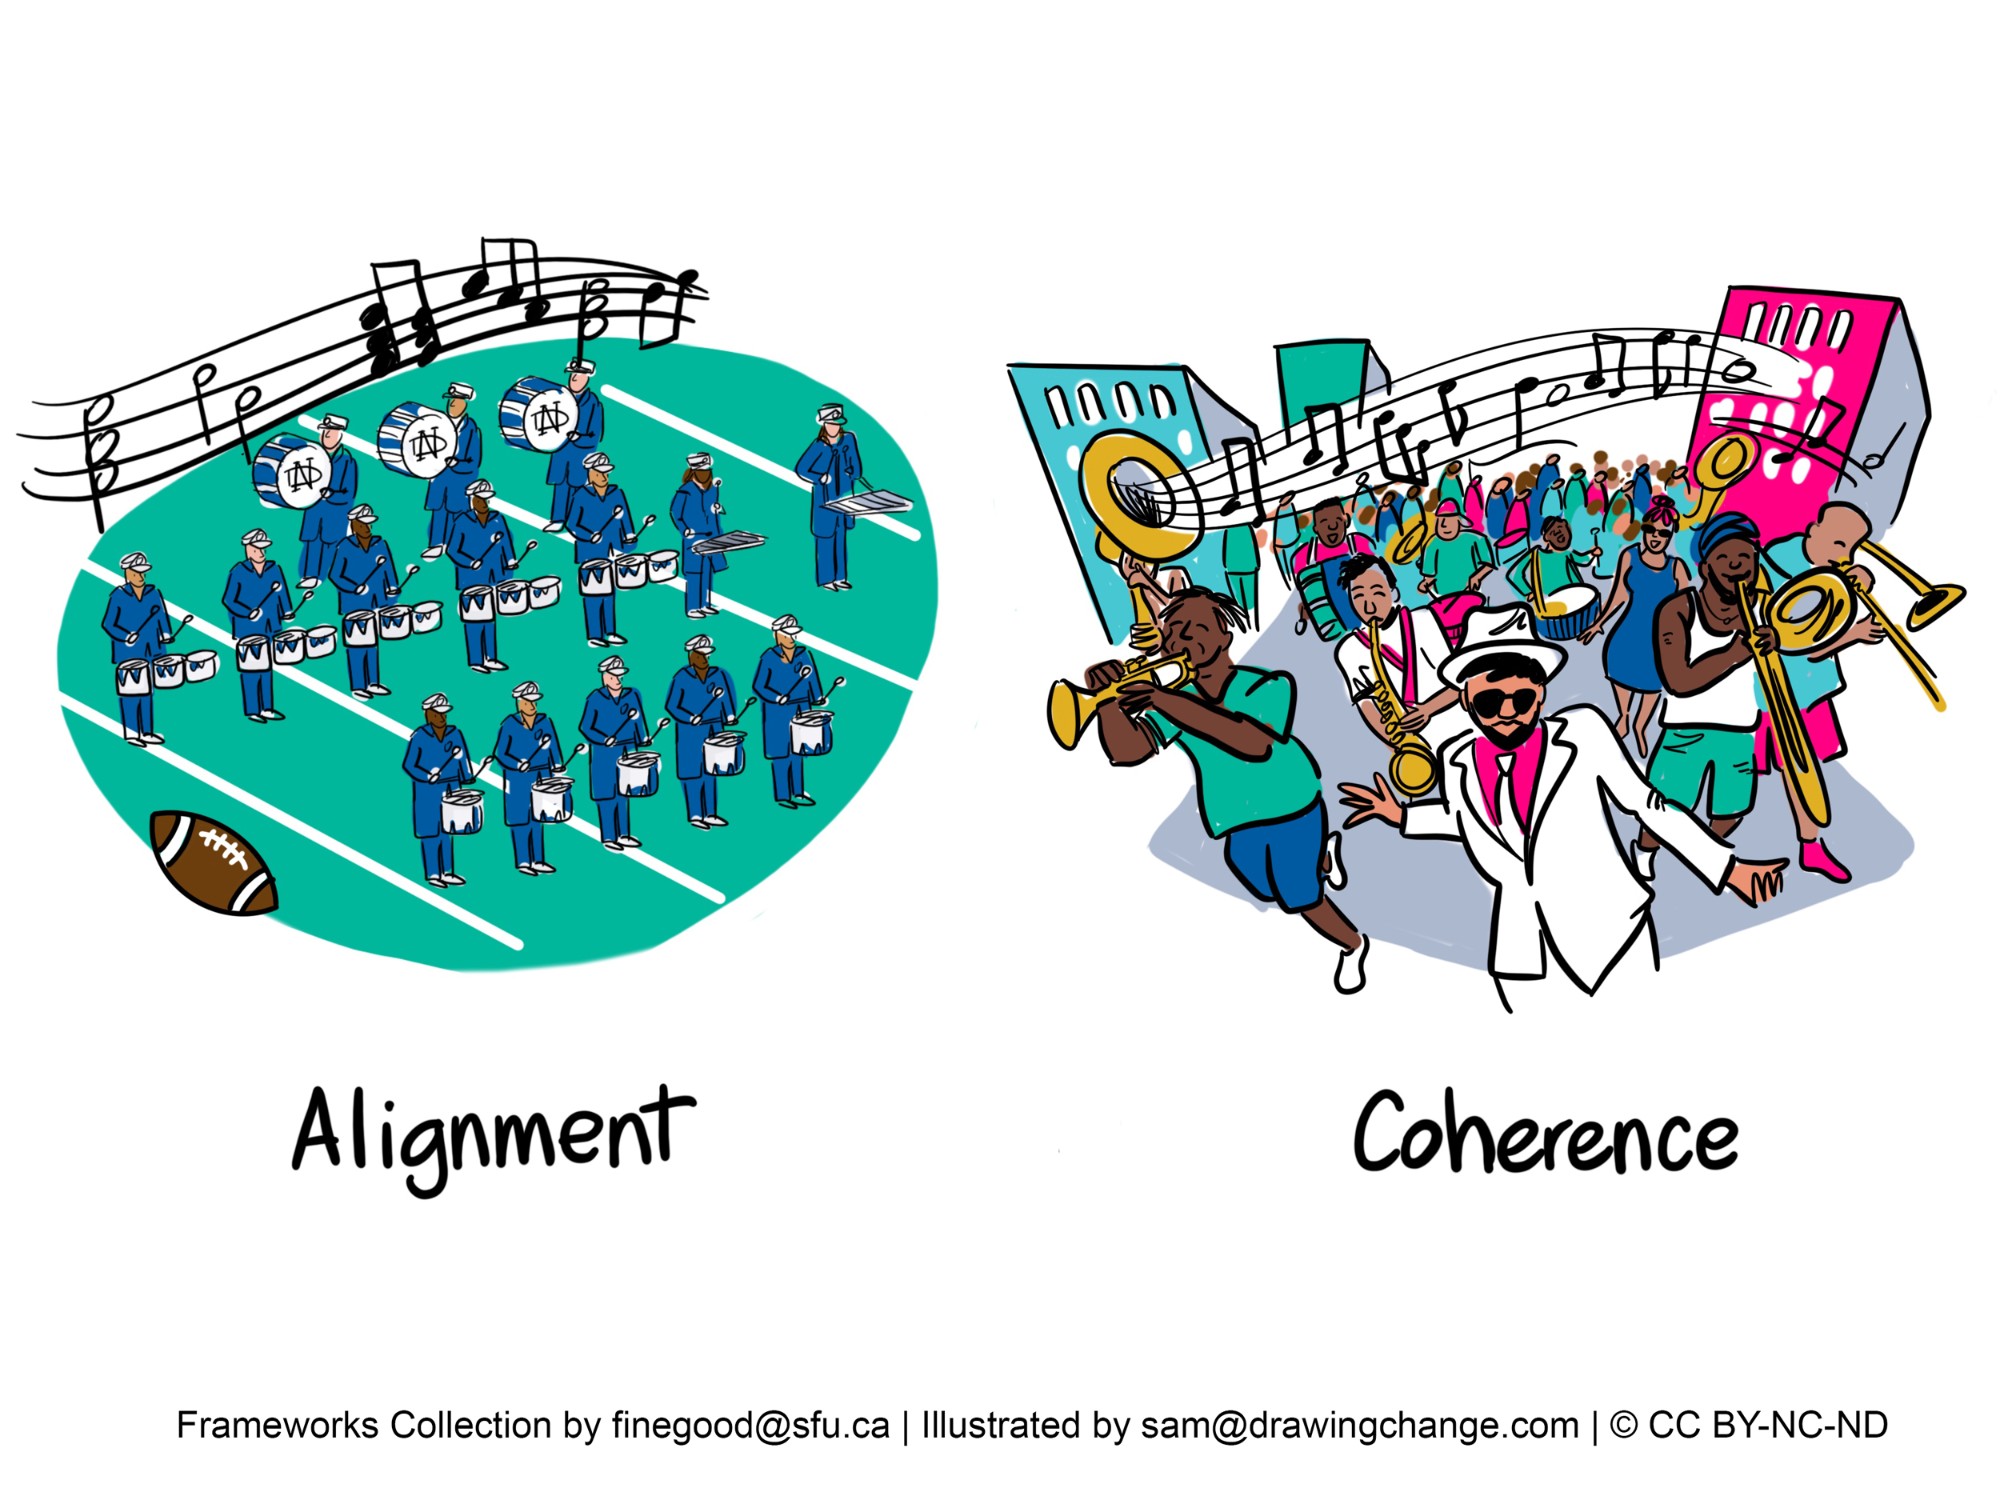 The image is split into two halves, each illustrating a different concept: "Alignment" and "Coherence."  On the left side, under the title "Alignment," is an illustration of a marching band on a football field there a music staff with notes above the band. The band members are uniformly dressed in blue and white, and each is playing a drum. The scene symbolizes precision and uniformity.  On the right side, the title "Coherence" is followed by a vibrant and diverse group of musicians, parading down a street. They are playing different instruments, such as trumpets and saxophones, and are dressed in various colors and styles, all walking in the same basic direction. The visual implies harmony despite diversity.  The bottom of the image includes credits: "Frameworks Collection by finegood@sfu.ca | Illustrated by sam@drawingchange.com | © CC BY-NC-ND".